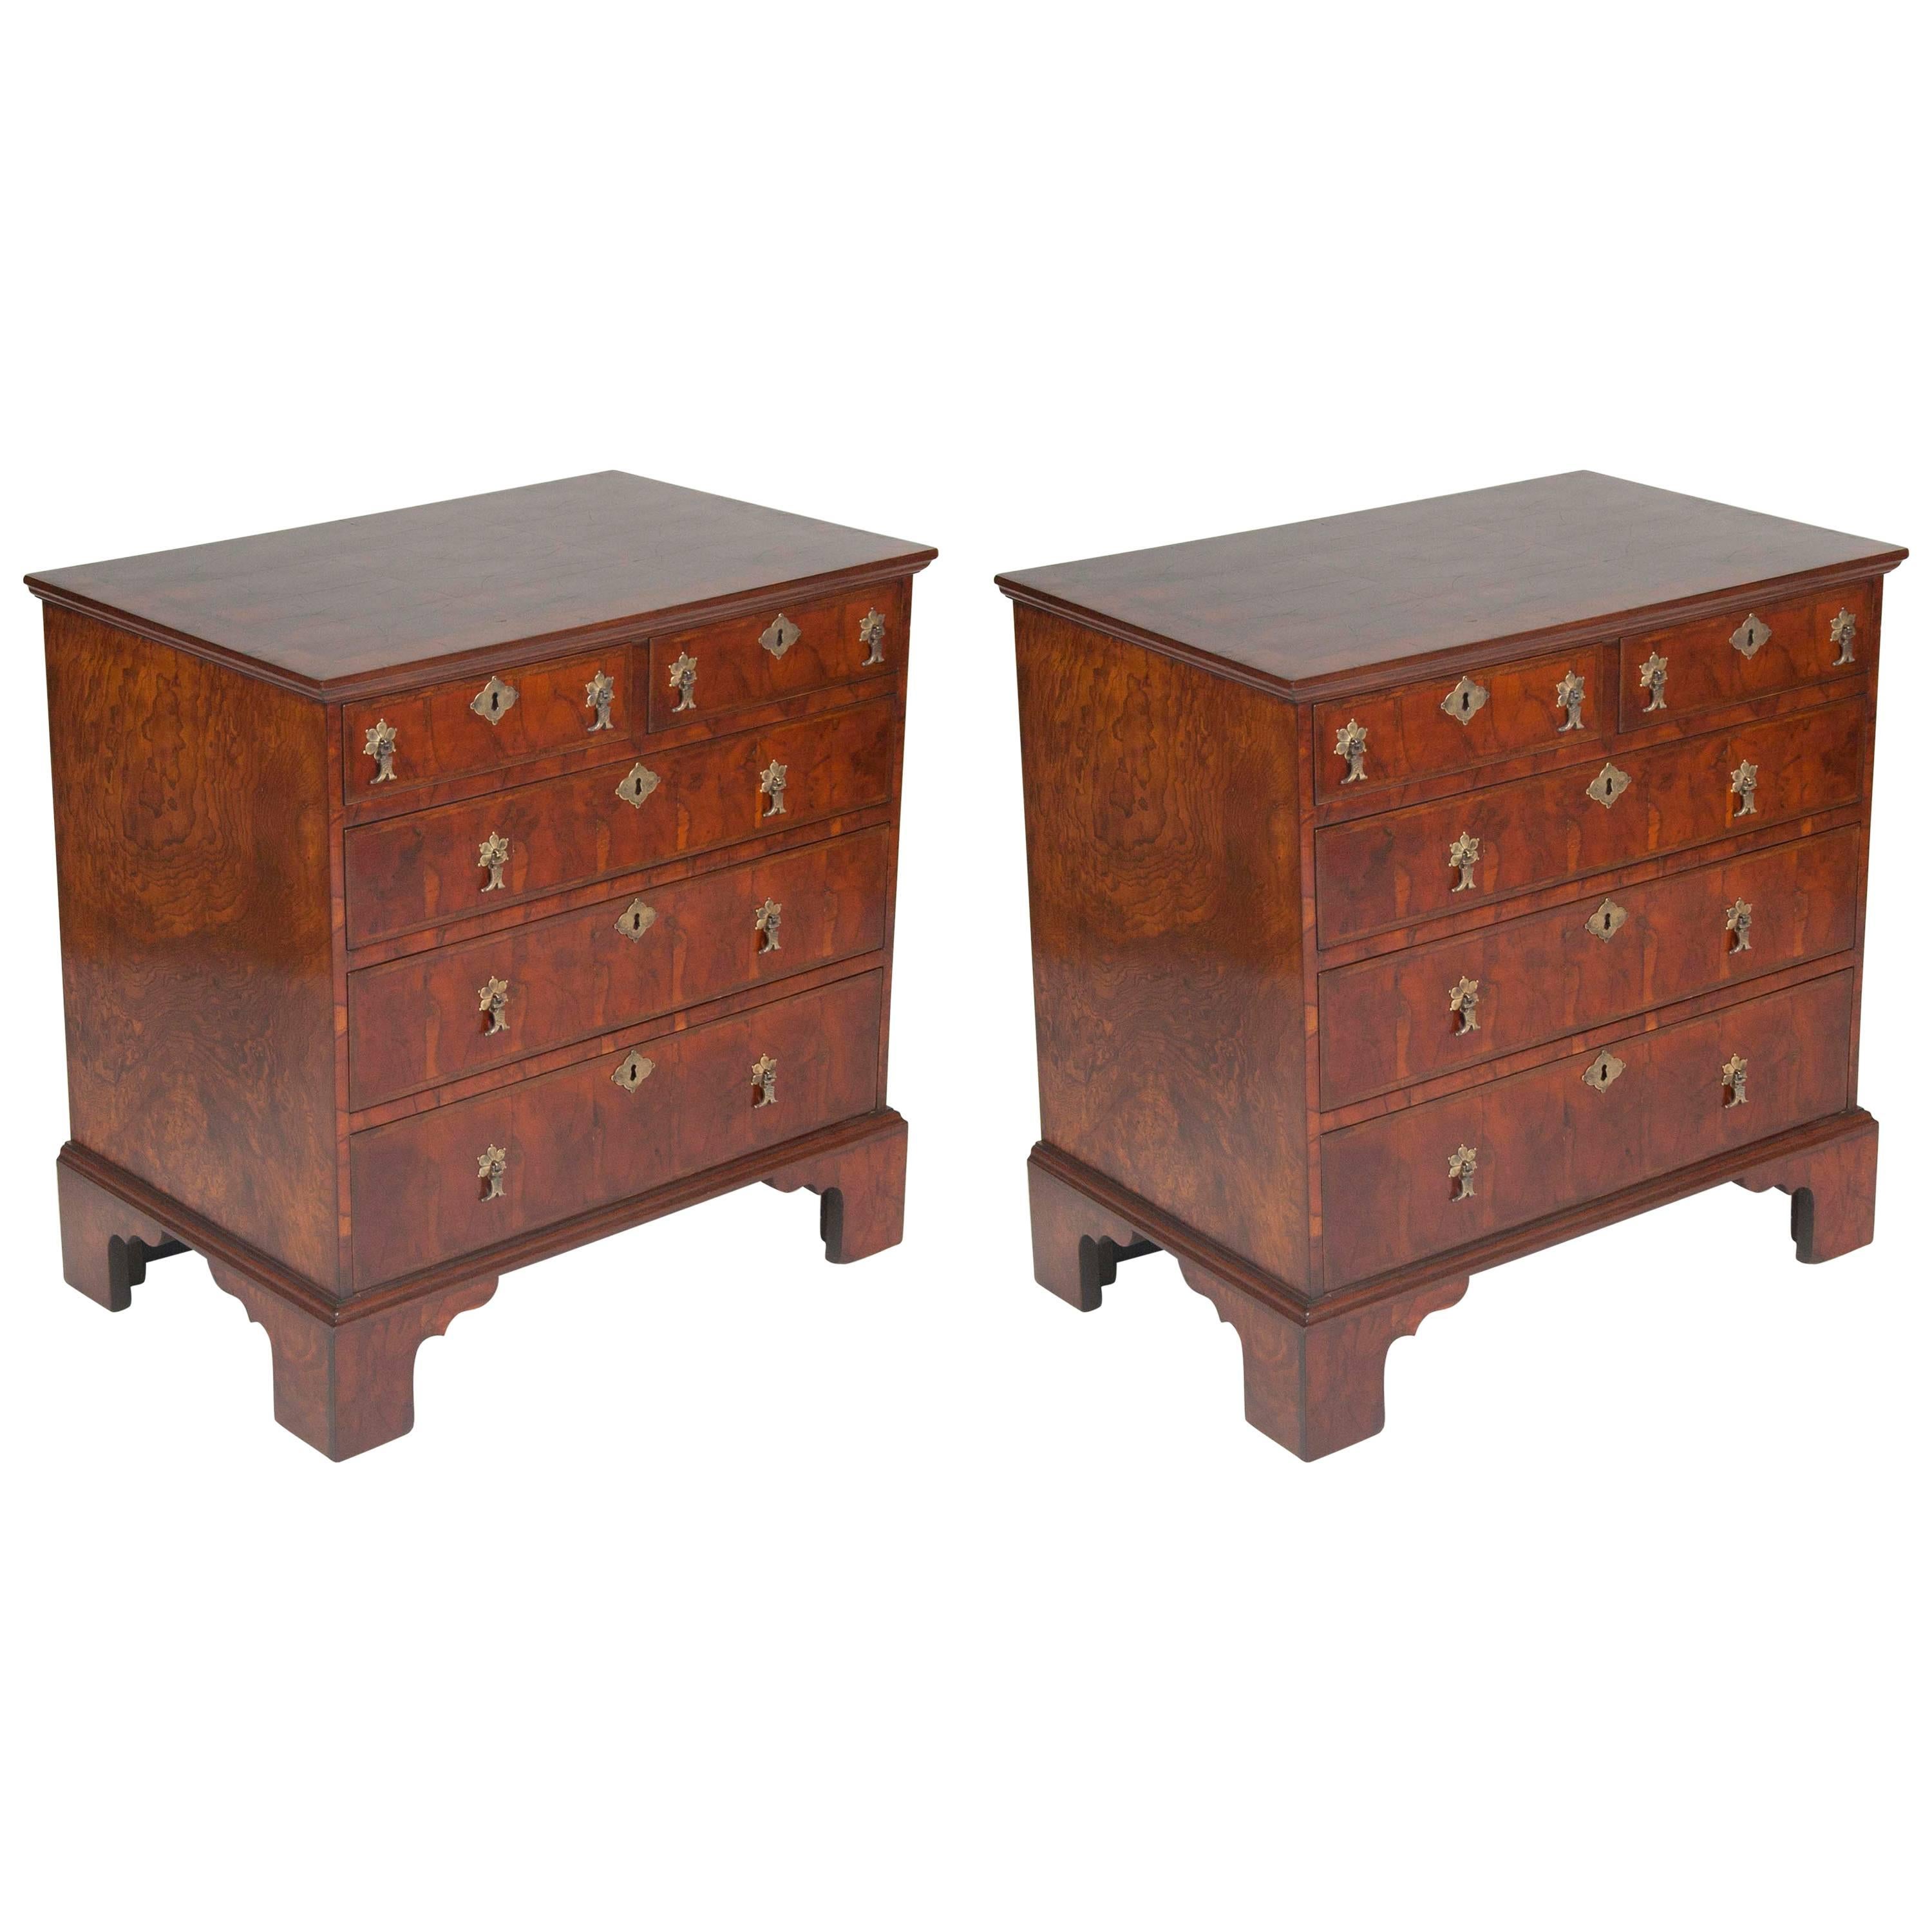 Pair of Oyster Shell Veneer Chests of Drawers